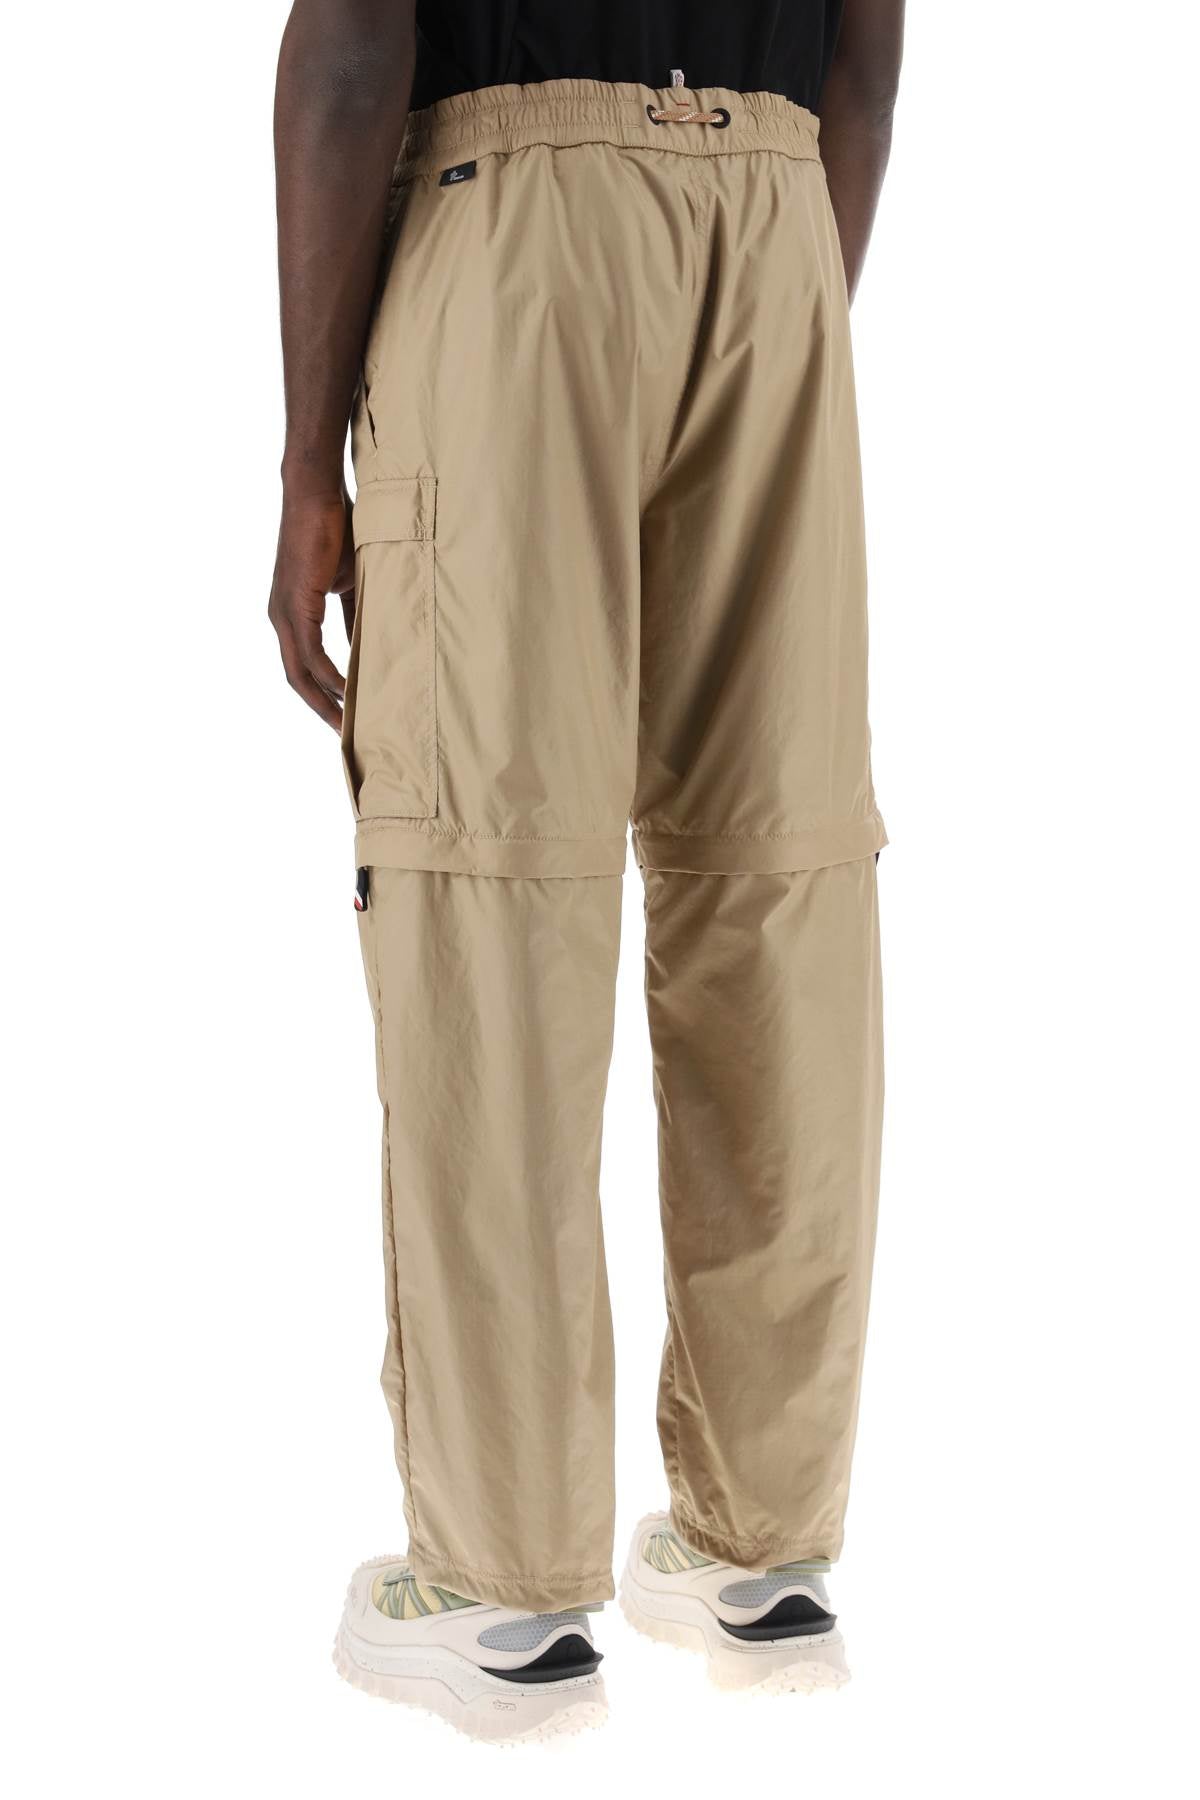 MONCLER GRENOBLE Convertible Ripstop Pants from the Day-namic Collection for Men in Tan